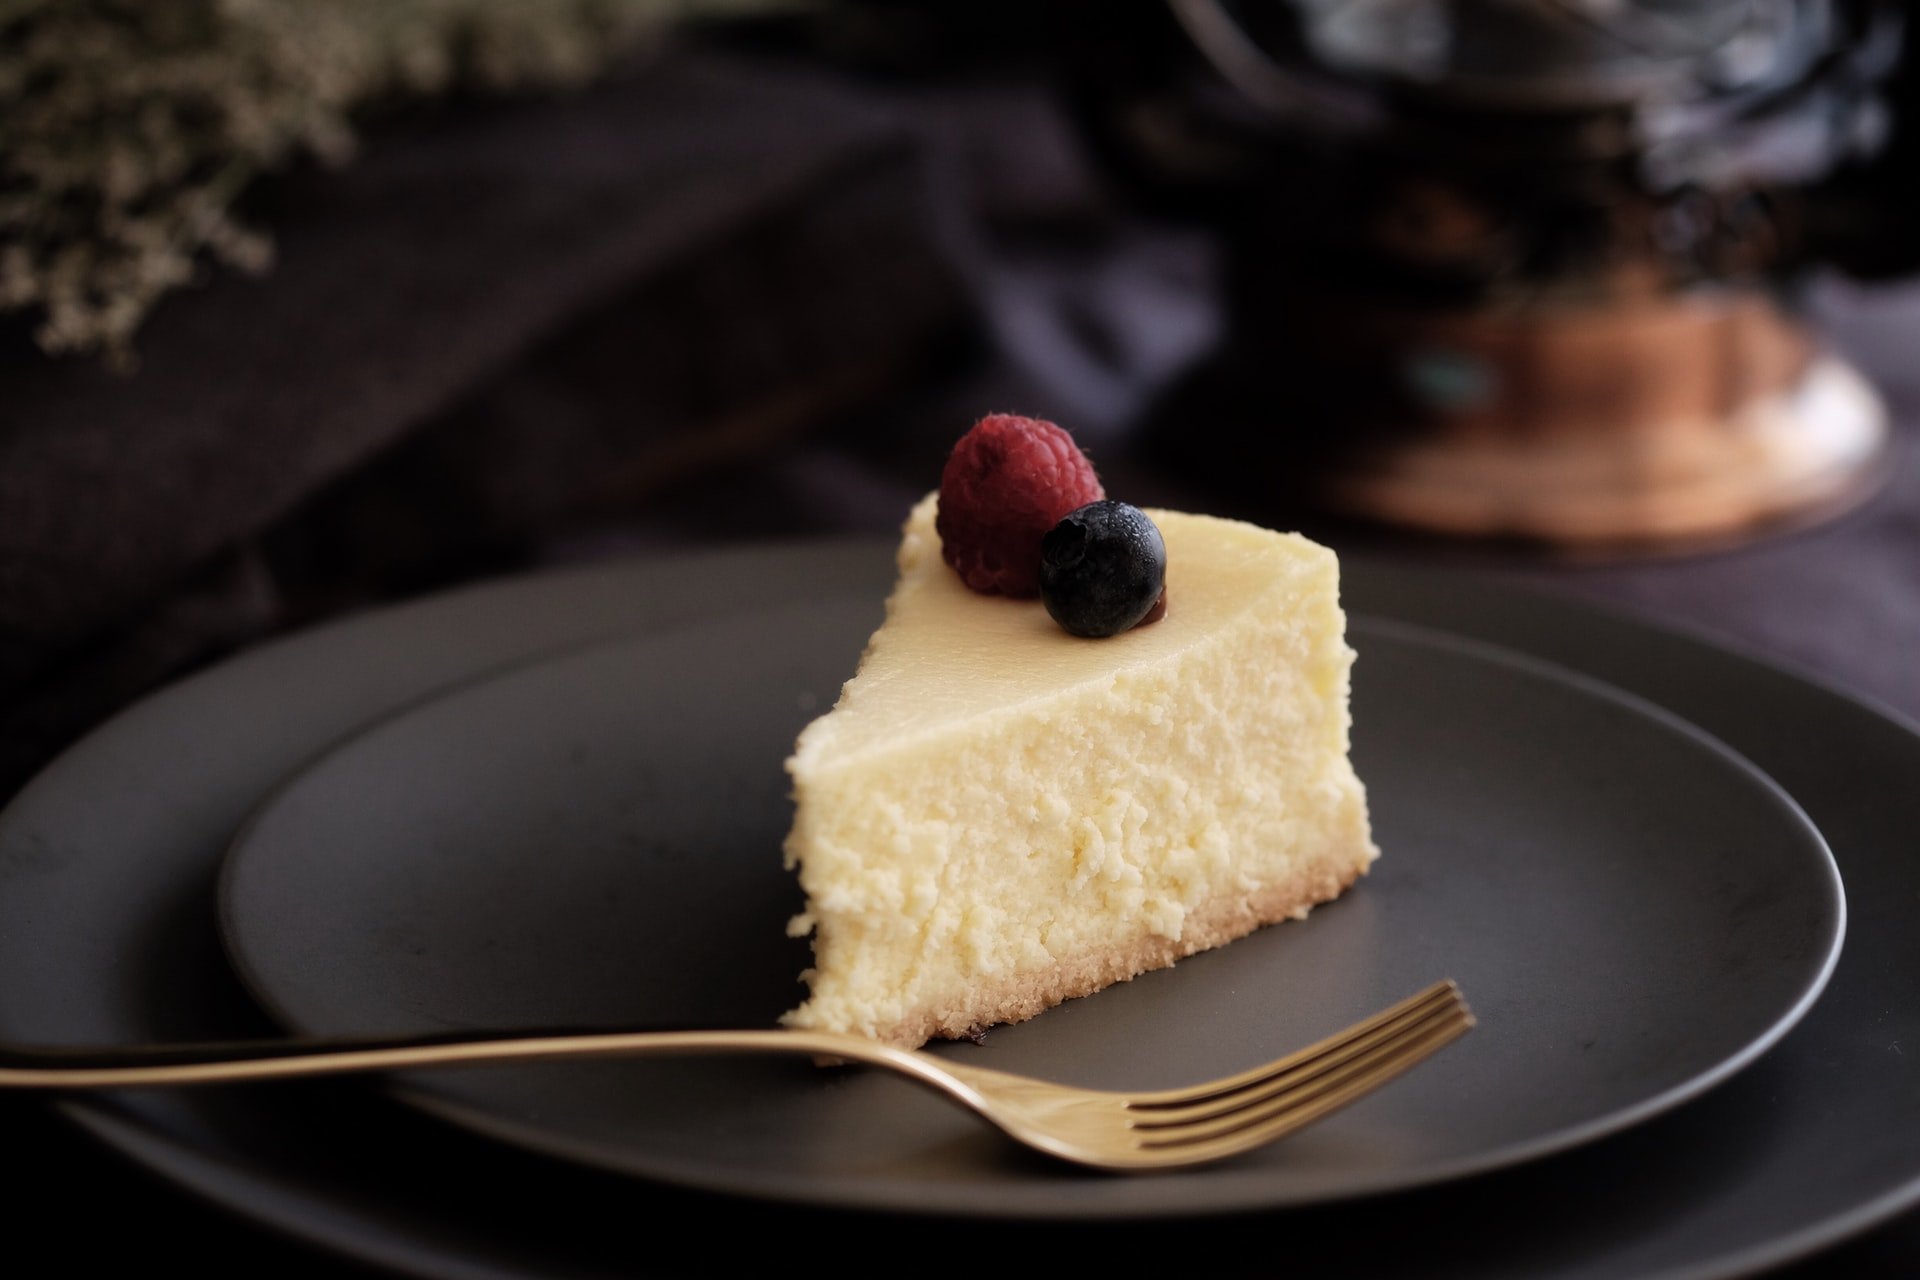 Her mother-in-law disliked the cheesecake she made. | Source: Unsplash